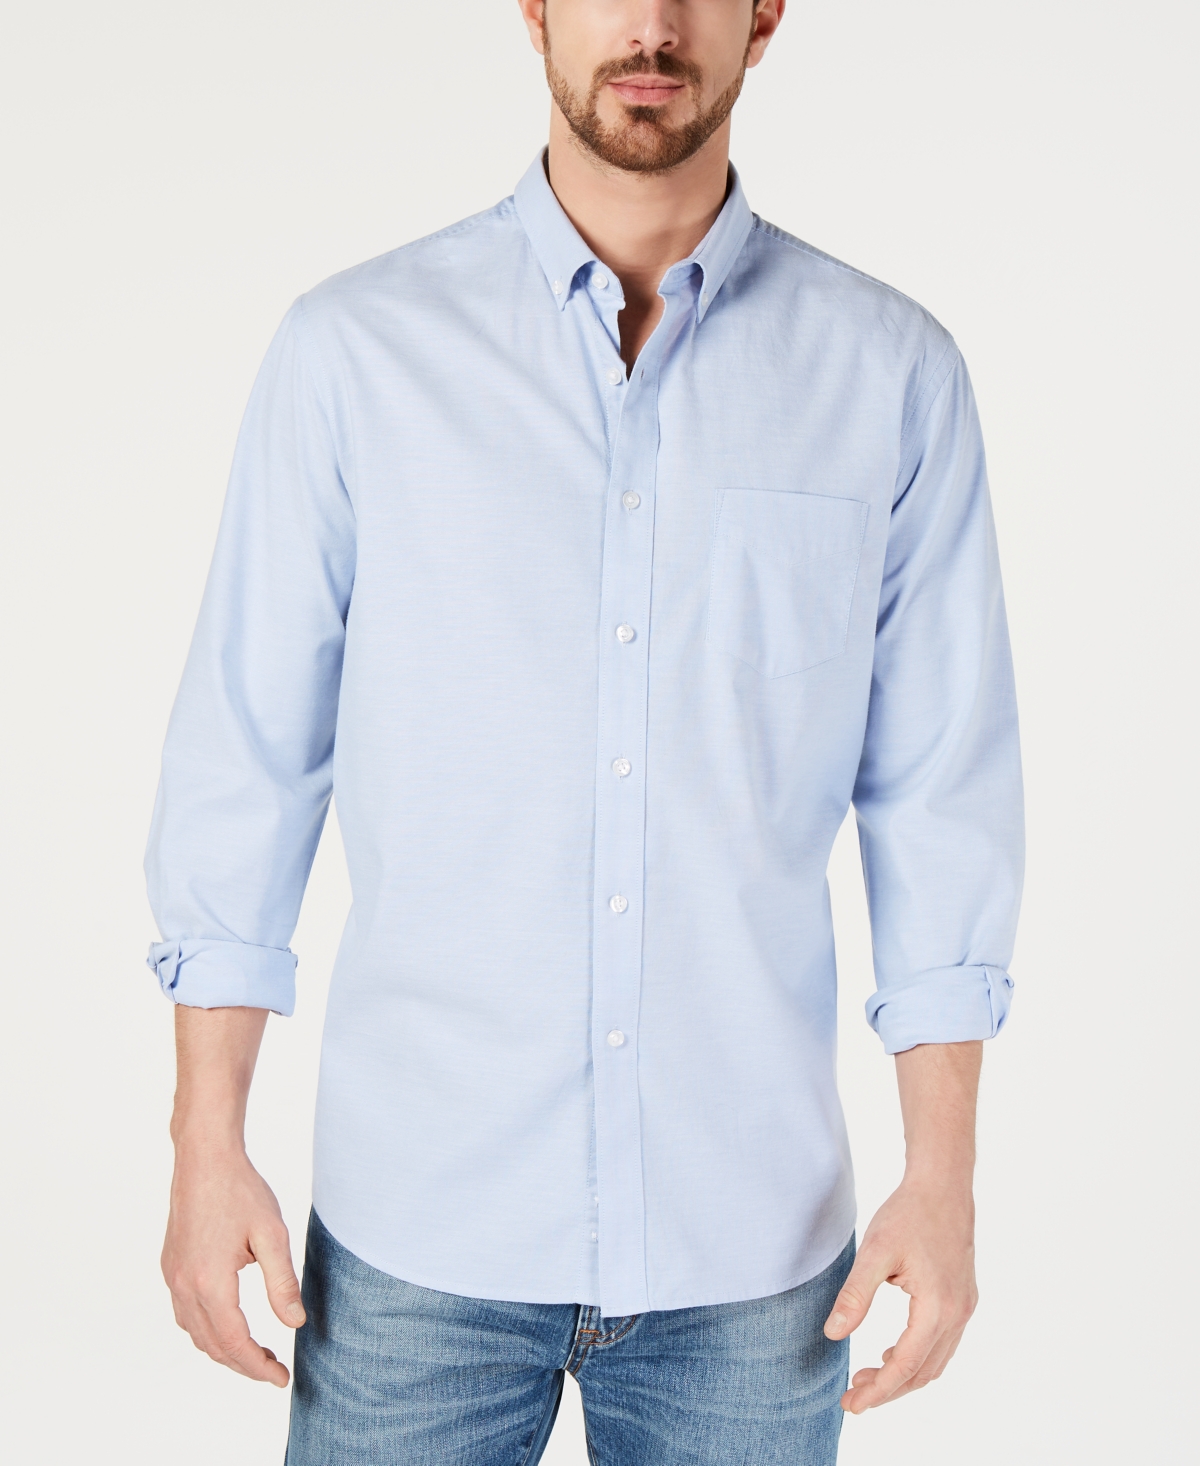 Men's Solid Stretch Oxford Cotton Shirt, Created for Macy's - Fresh Indigo